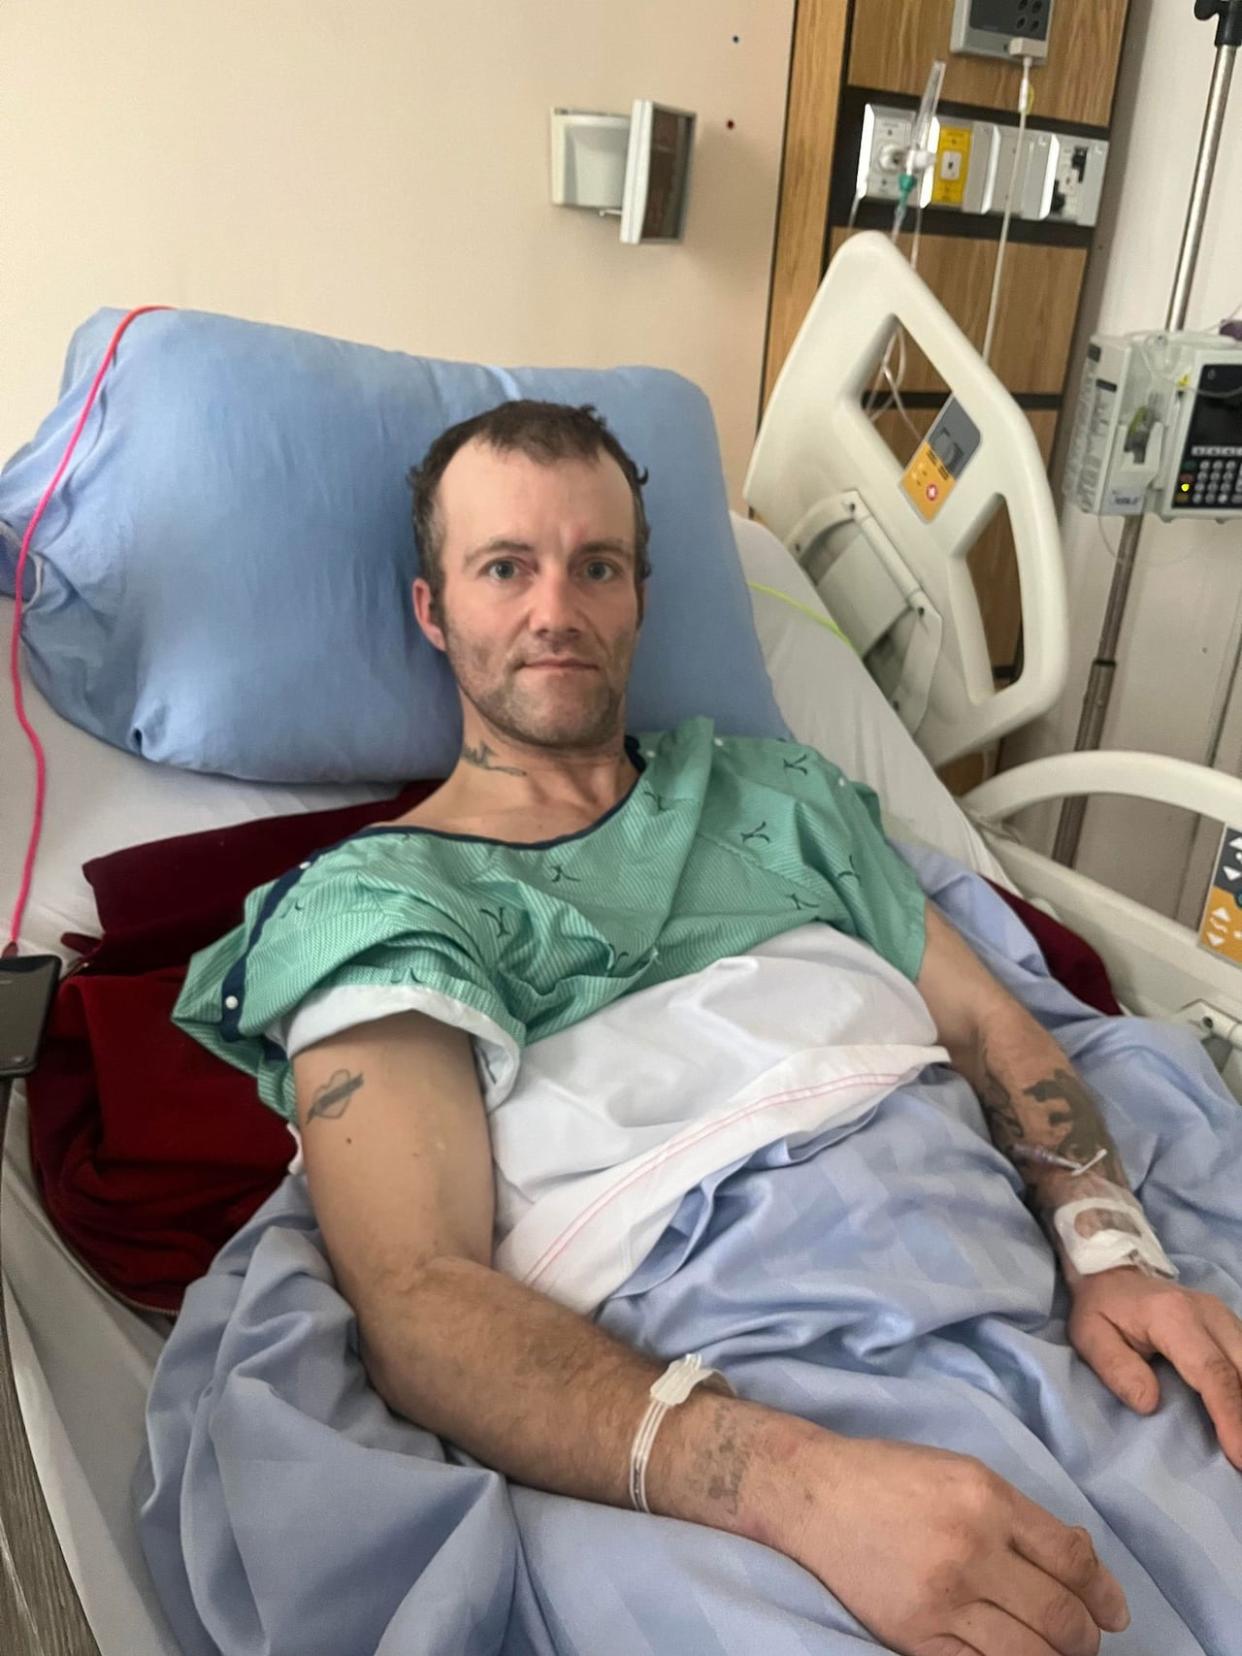 Jamie Langille, 43, of Saint John, is facing a long recovery after having his left leg amputated below the knee and half his right foot amputated on Jan. 19 due to frostbite. (Catherine Driscoll - image credit)